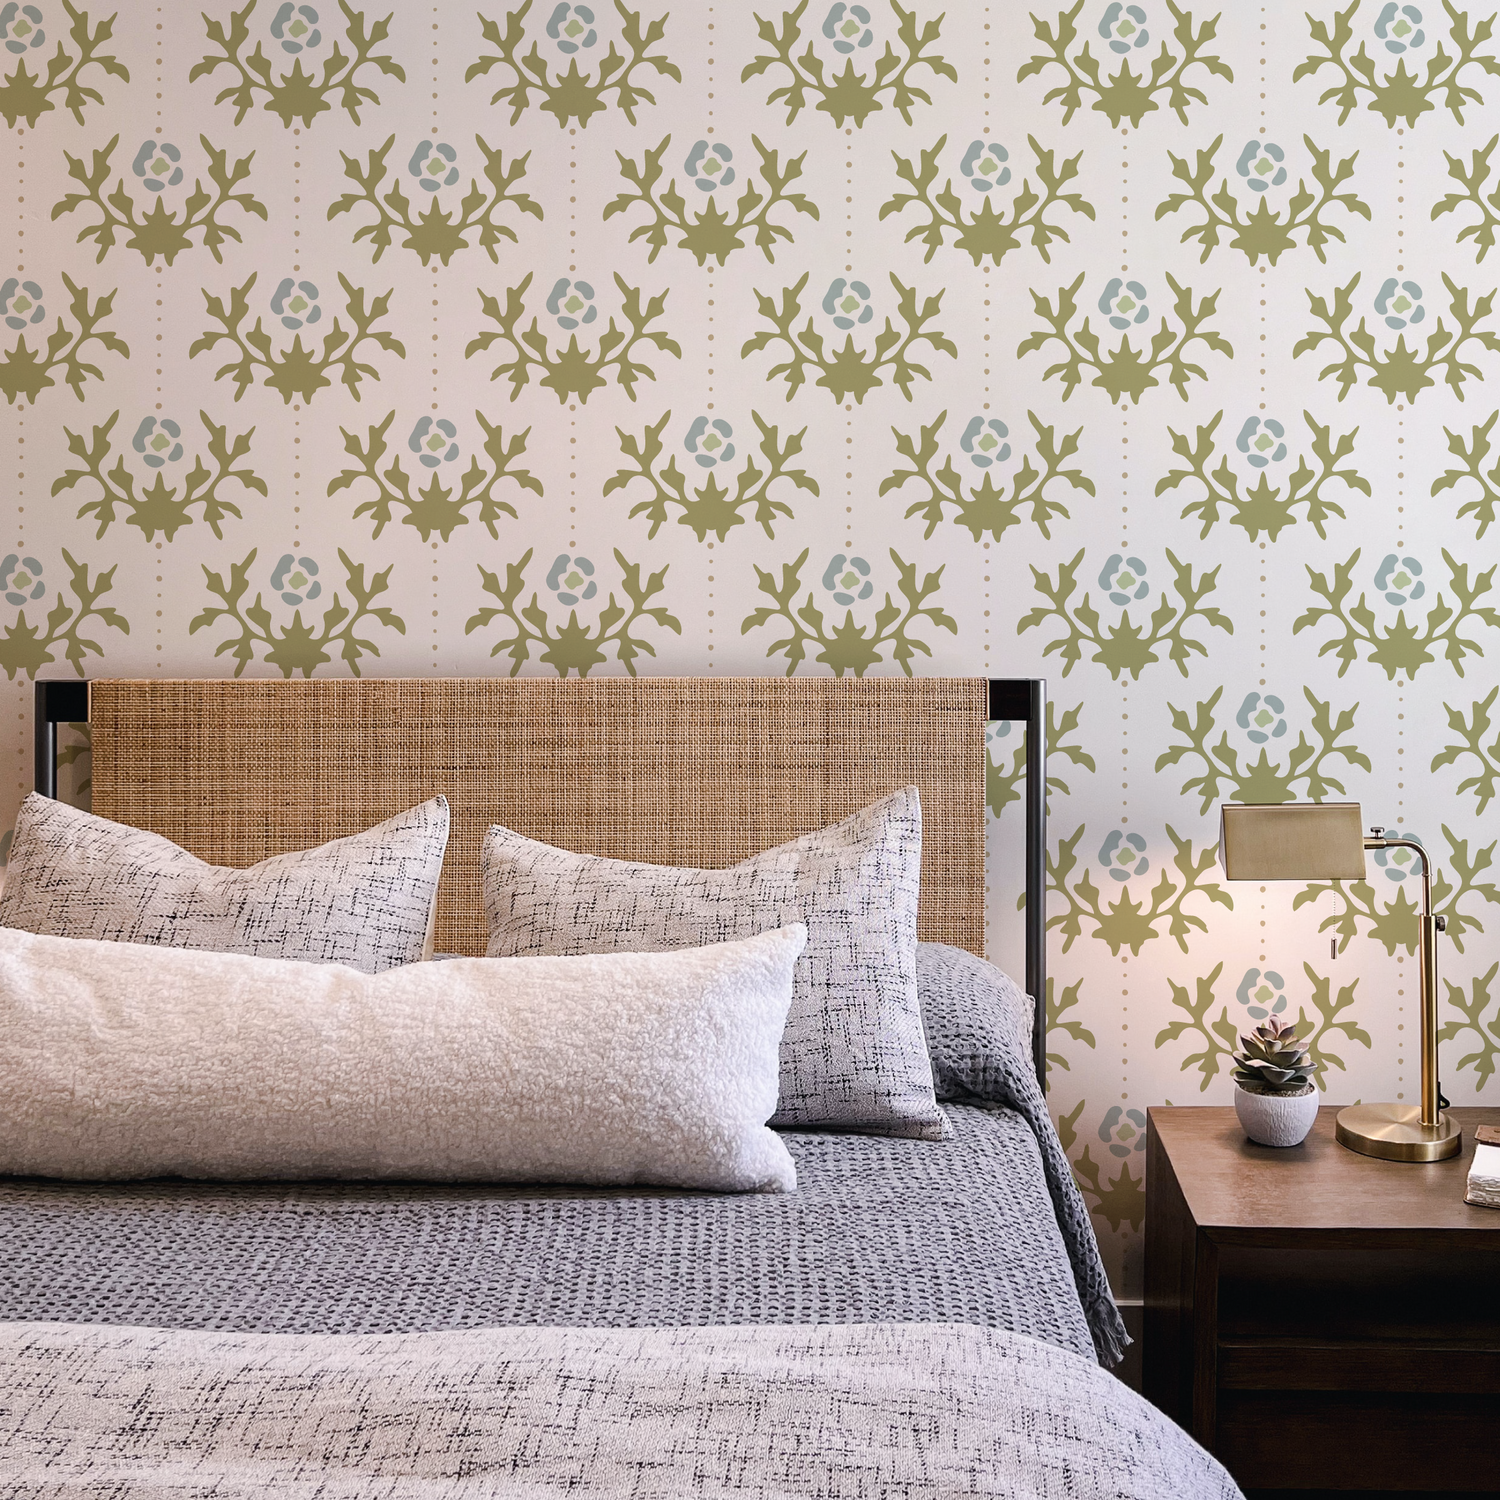 How to Make Your Own Rent Friendly Removable Wallpaper - At Charlotte's  House